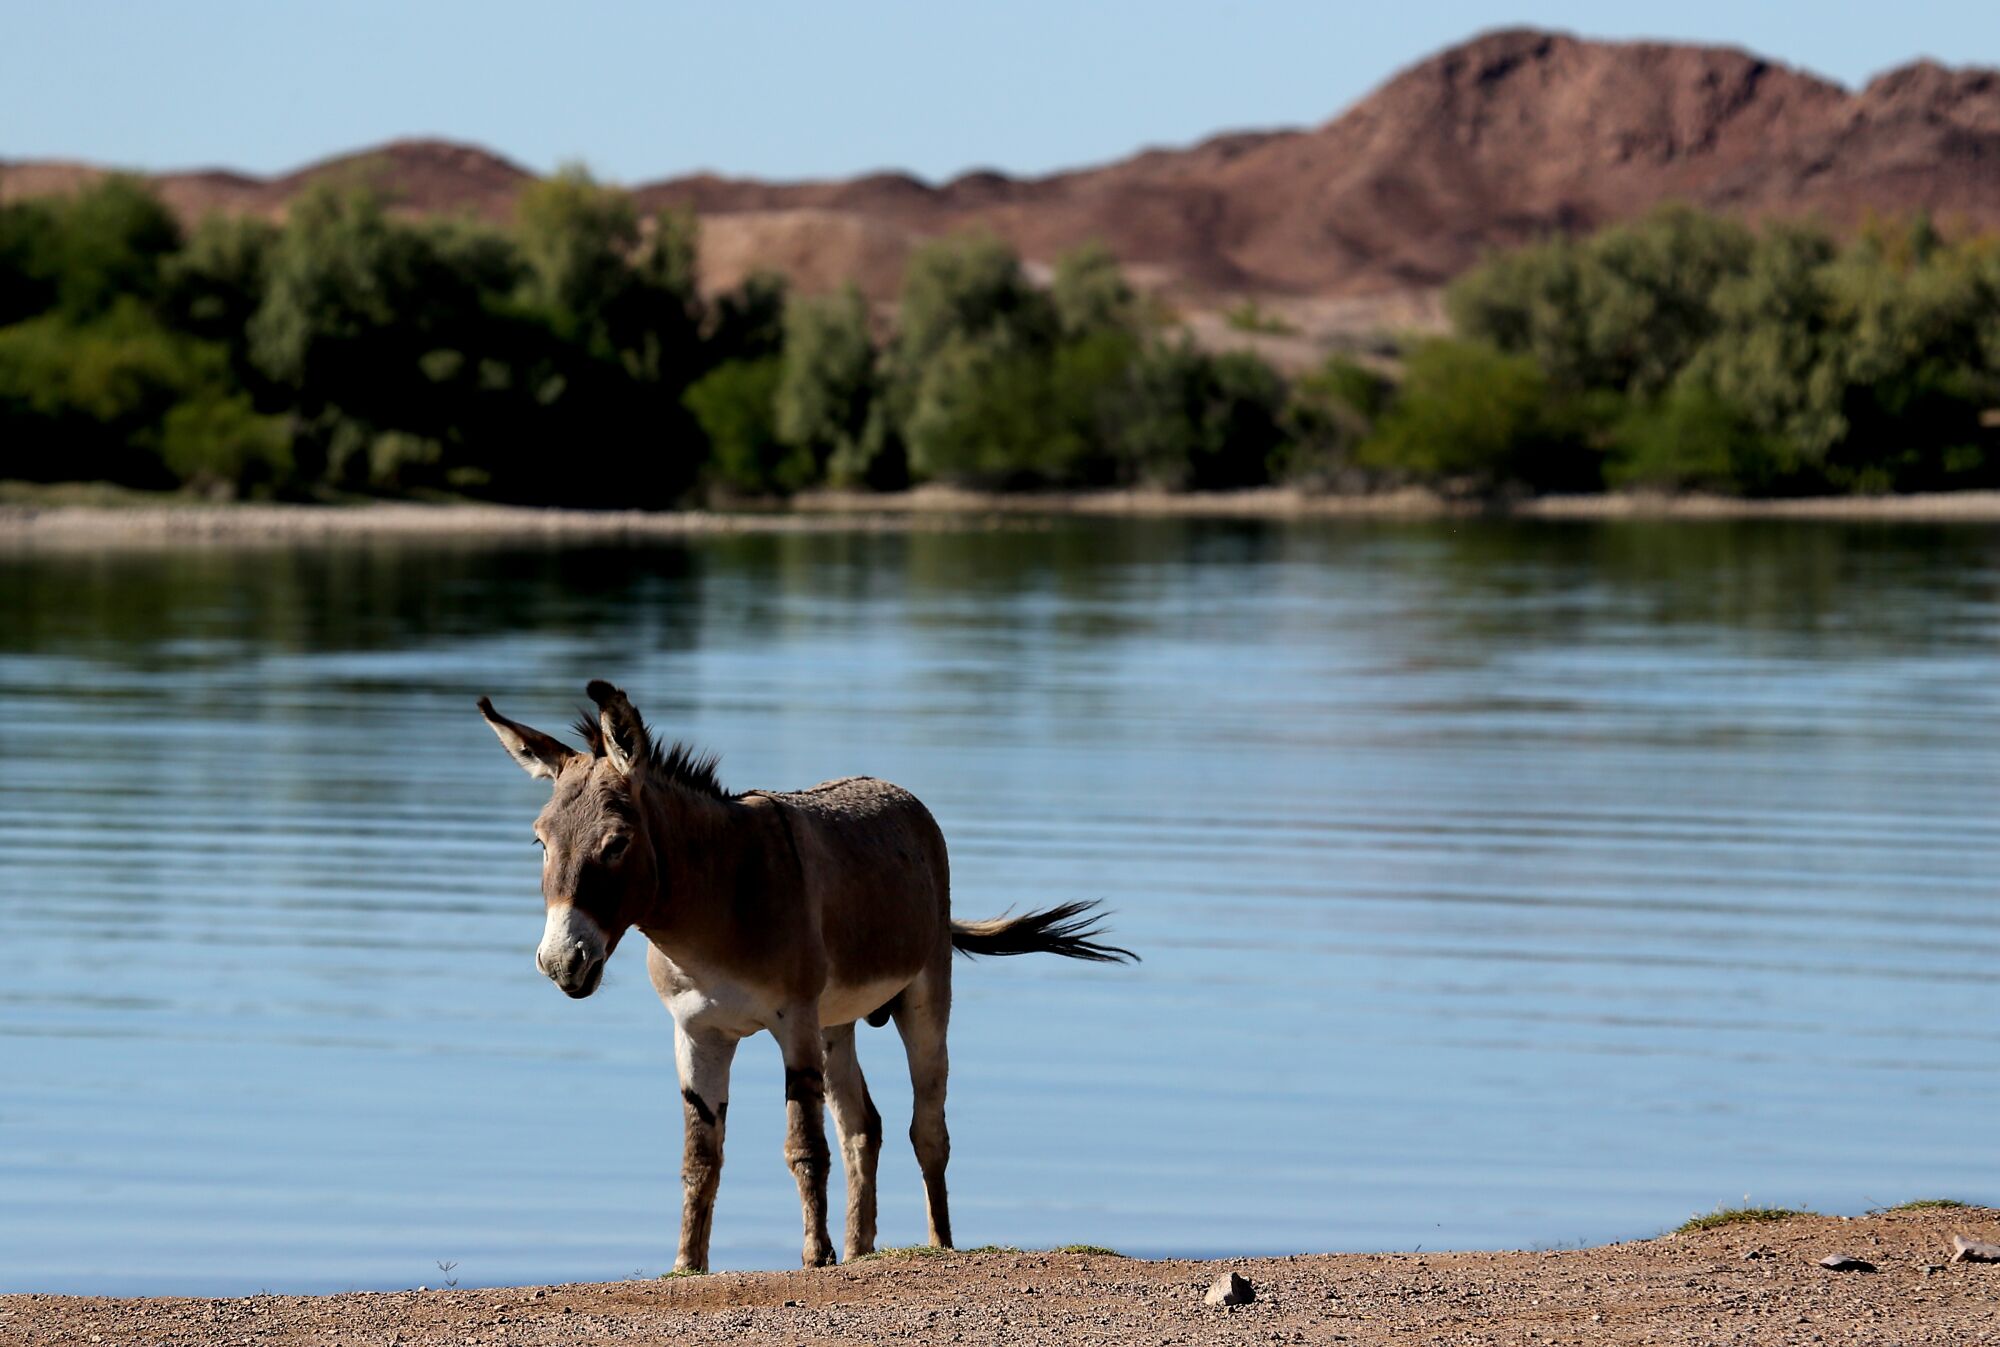 A wild burro walks along the banks of the Imperial Reservoir near Yuma, where desalting and water diversion take place.